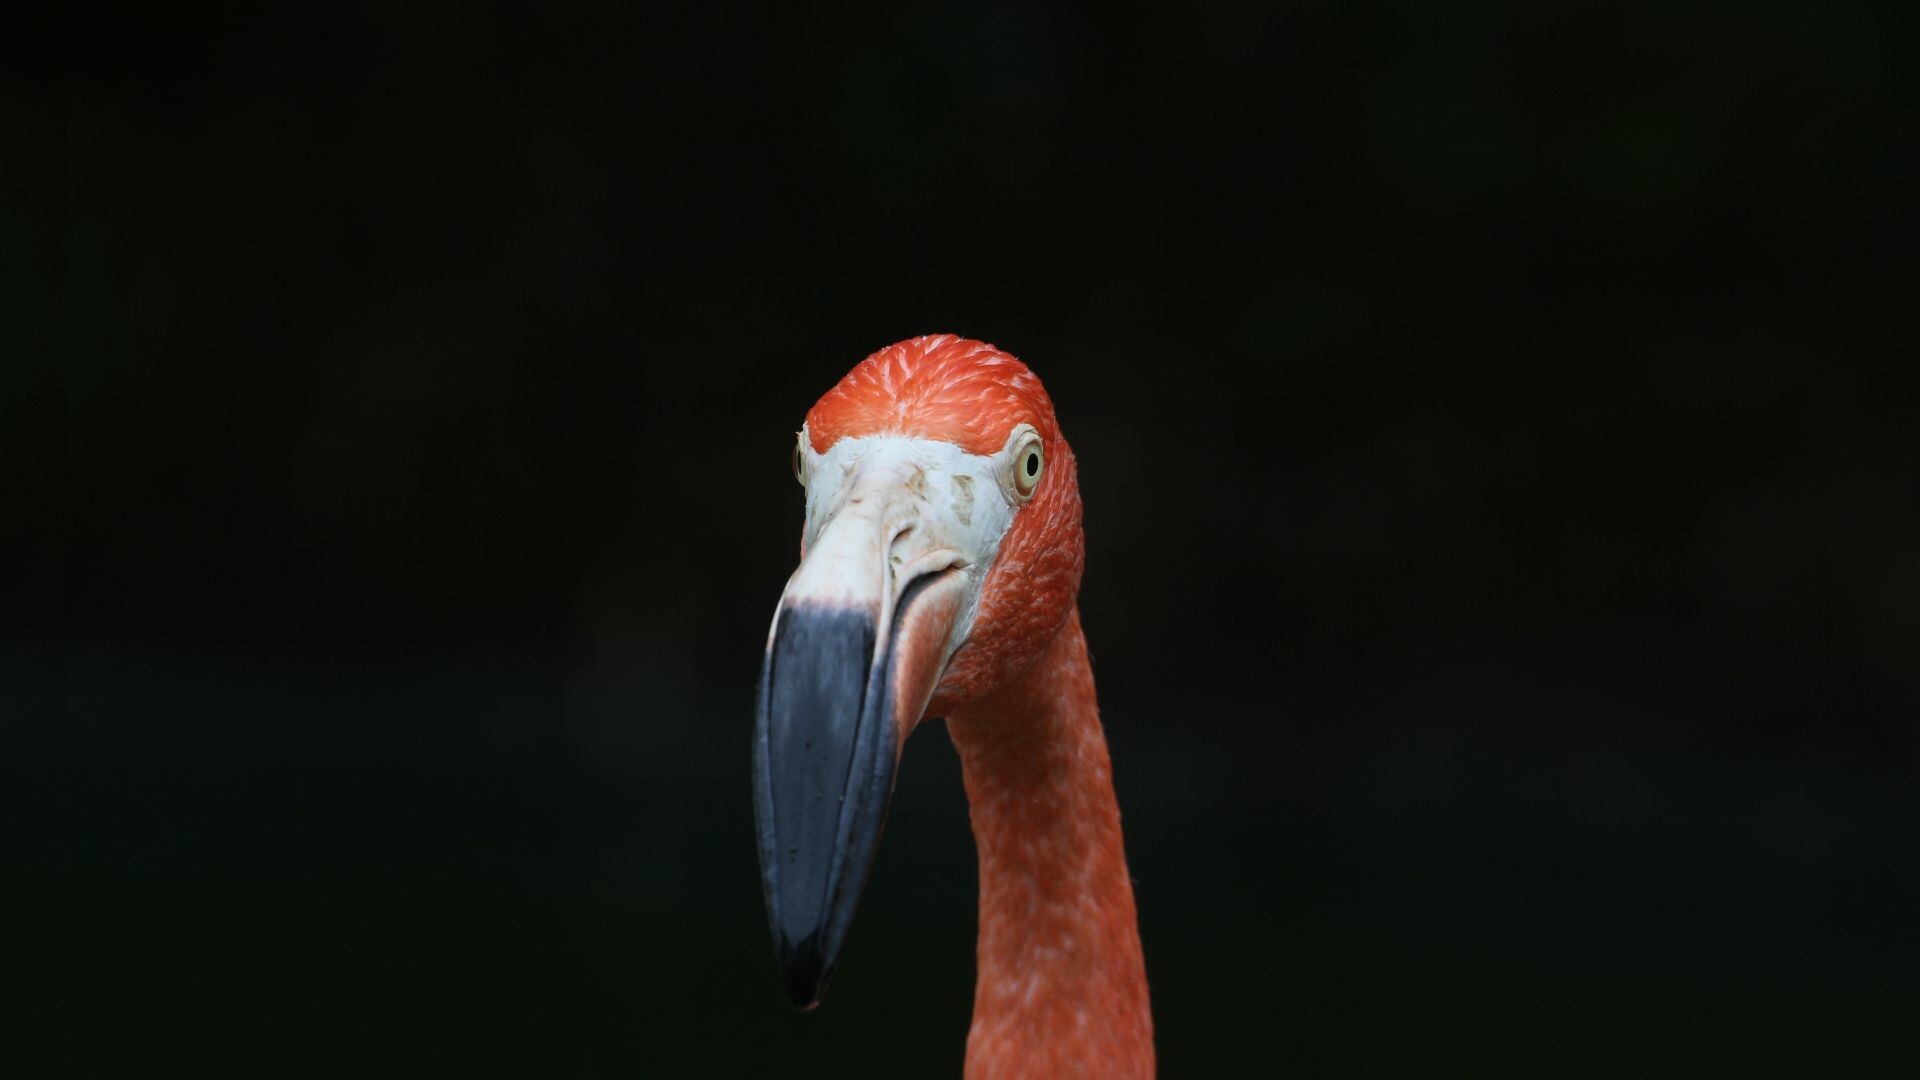 Flamingo: A pink colored bird that survives on an omnivore diet. 1920x1080 Full HD Wallpaper.